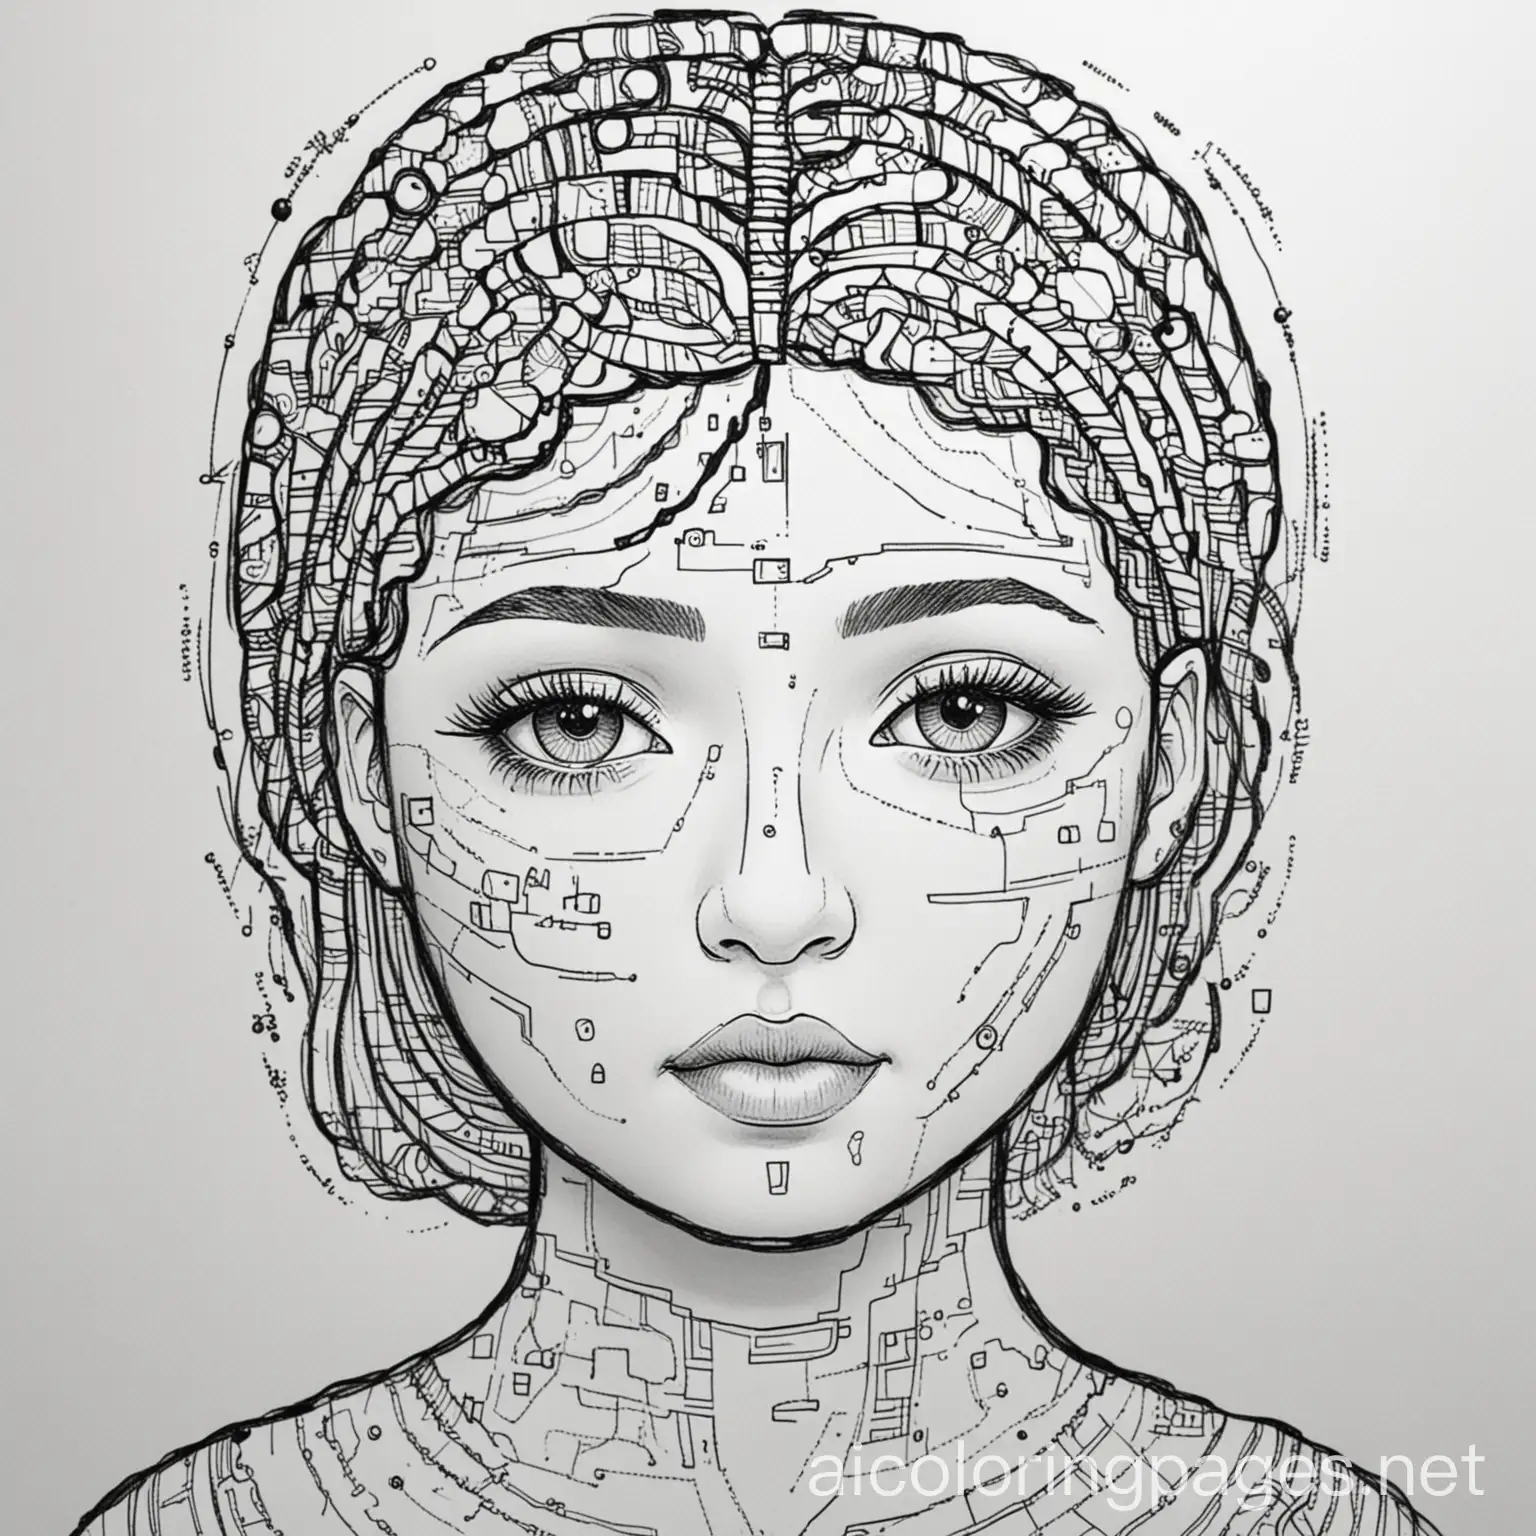 AI and the mind, Coloring Page, black and white, line art, white background, Simplicity, Ample White Space. The background of the coloring page is plain white to make it easy for young children to color within the lines. The outlines of all the subjects are easy to distinguish, making it simple for kids to color without too much difficulty